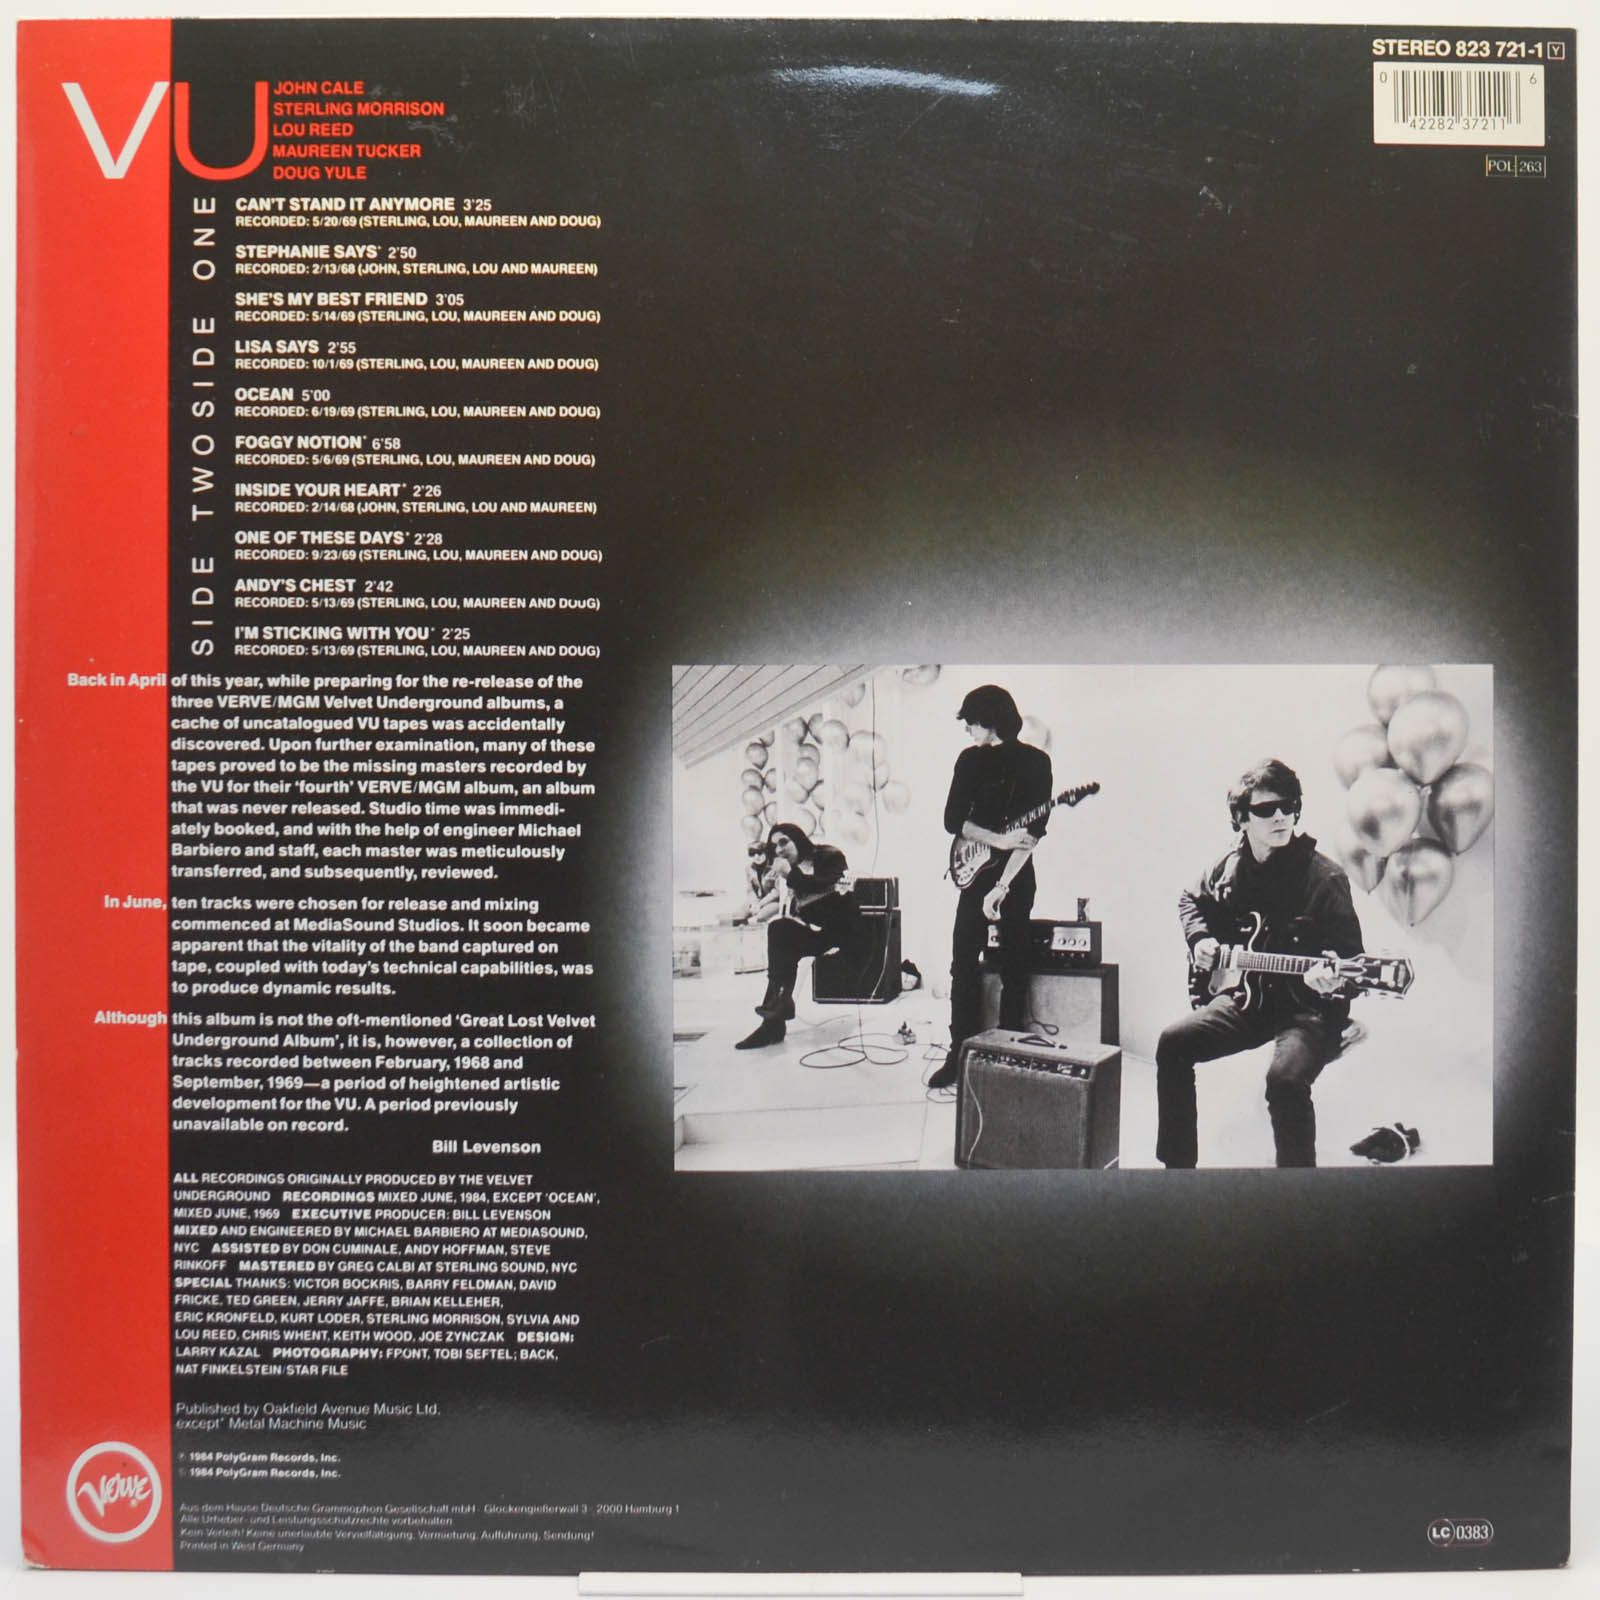 Velvet Underground — VU (A Collection Of Previously Unreleased Recordings), 1985